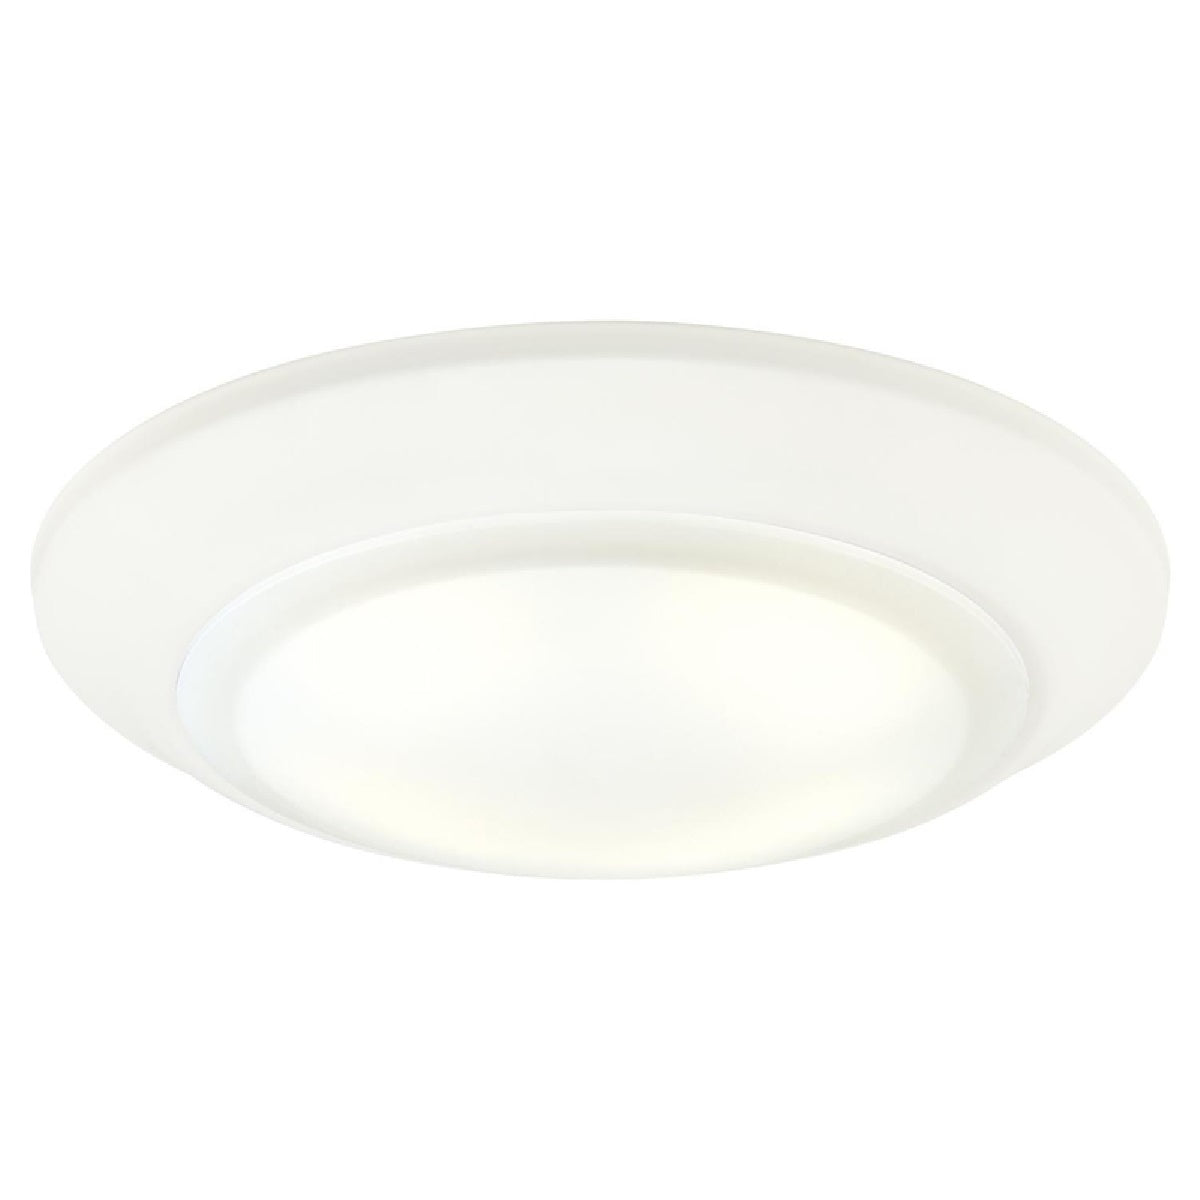 Buy westinghouse 63229 - Online store for lamps & light fixtures, recessed in USA, on sale, low price, discount deals, coupon code